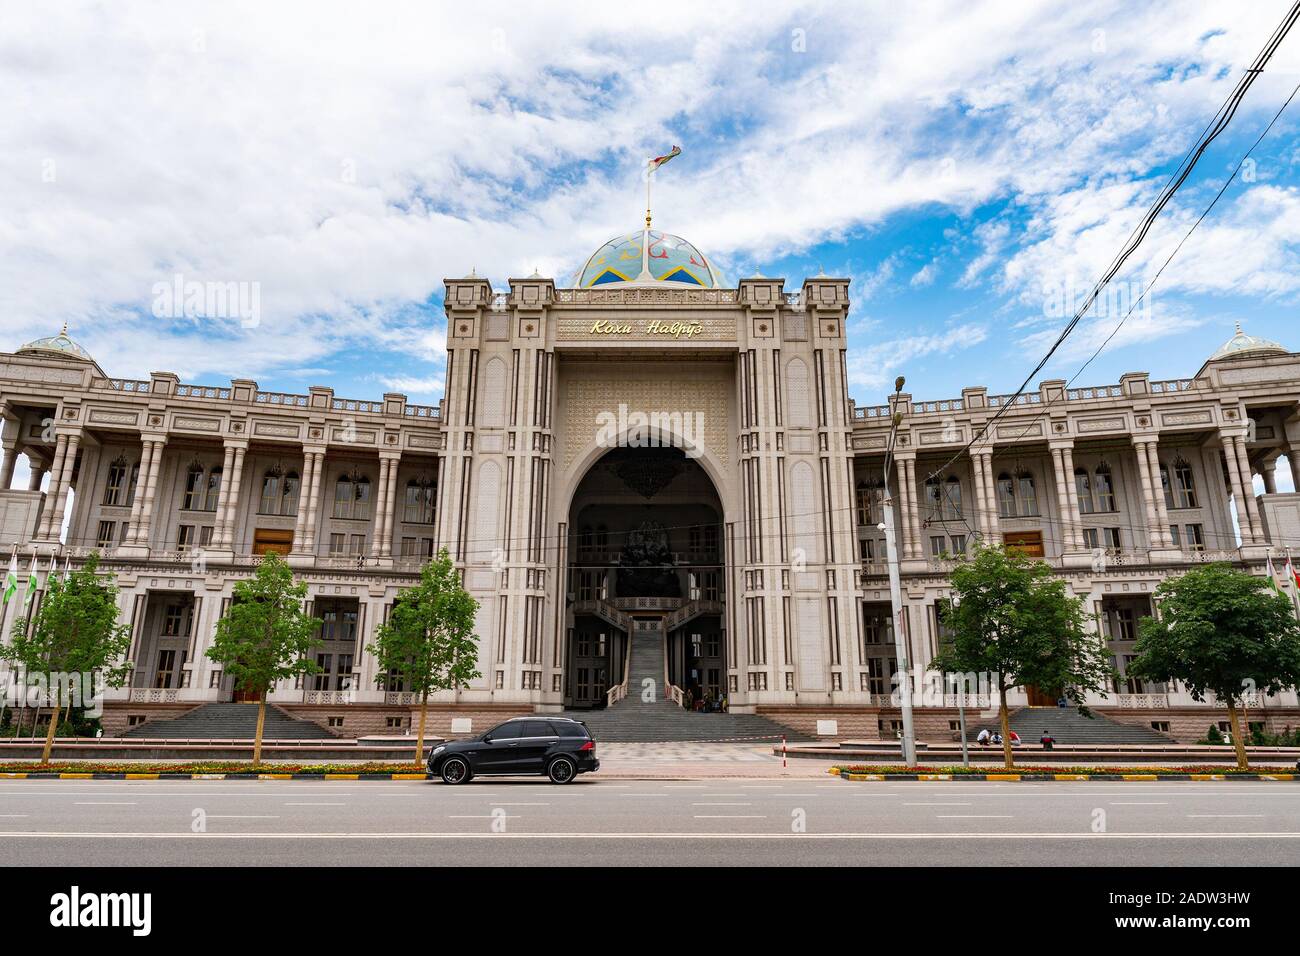 Dushanbe Navruz Palace Picturesque View from Ismoil Somoni Avenue on a Cloudy Rainy Day Stock Photo